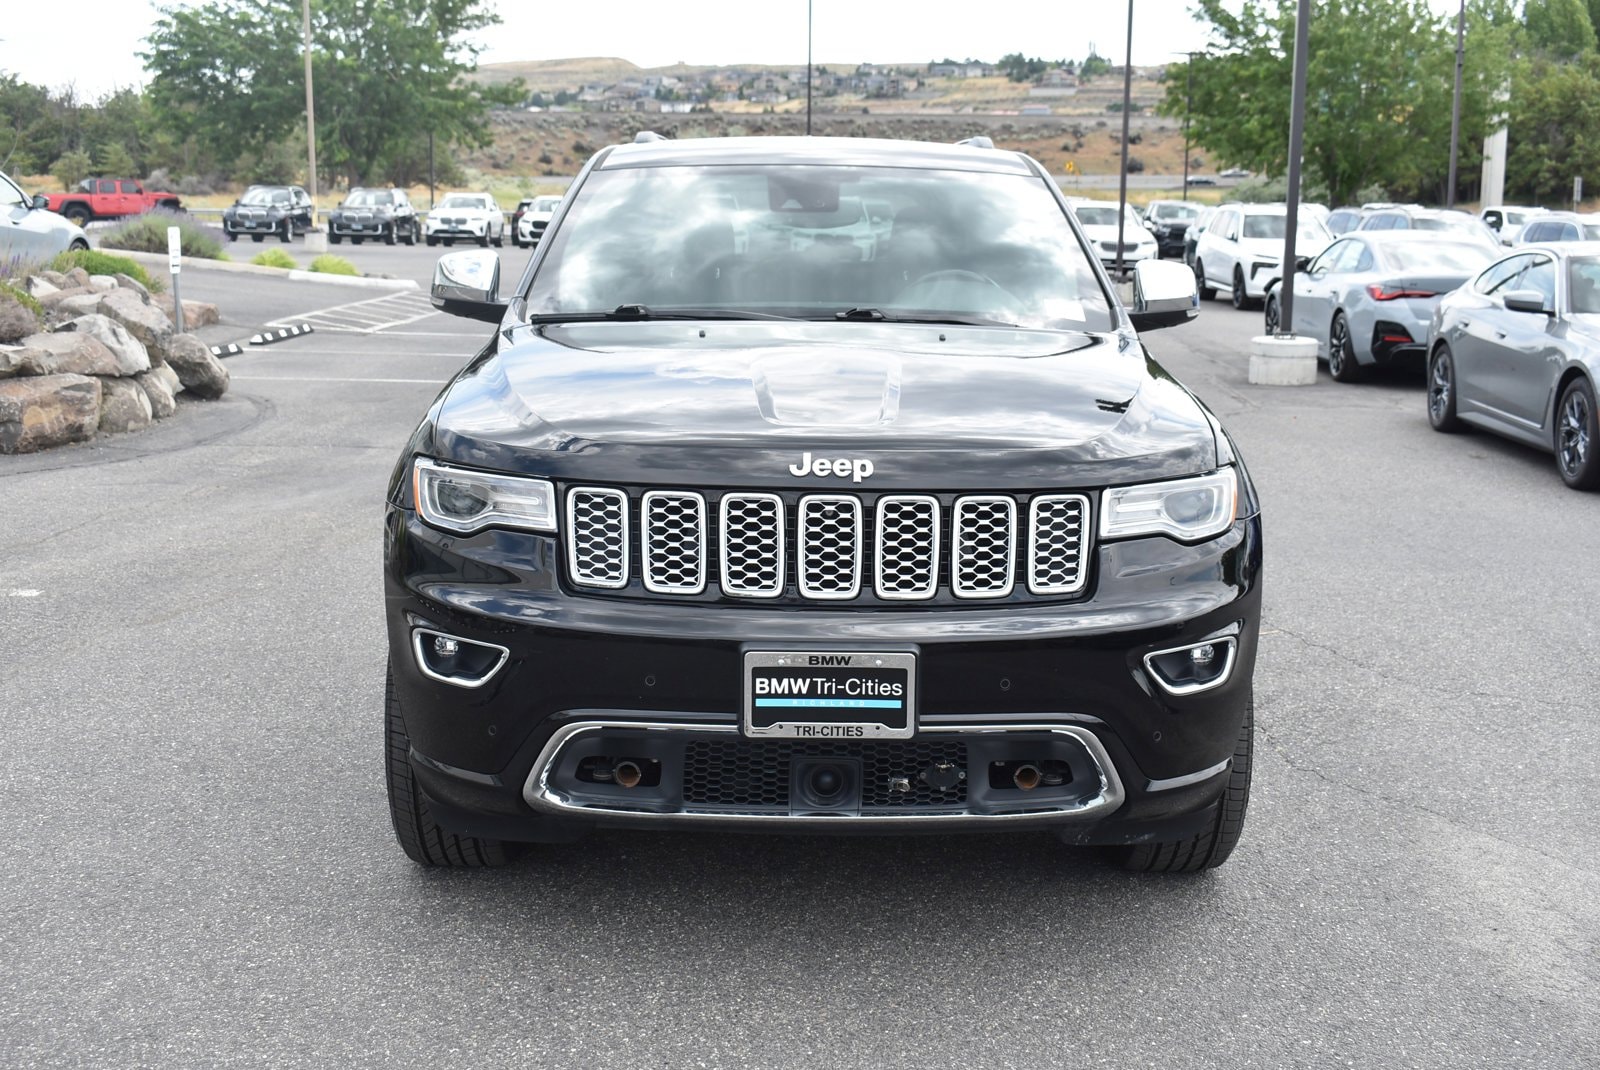 Used 2018 Jeep Grand Cherokee Overland with VIN 1C4RJFCT9JC437721 for sale in Richland, WA